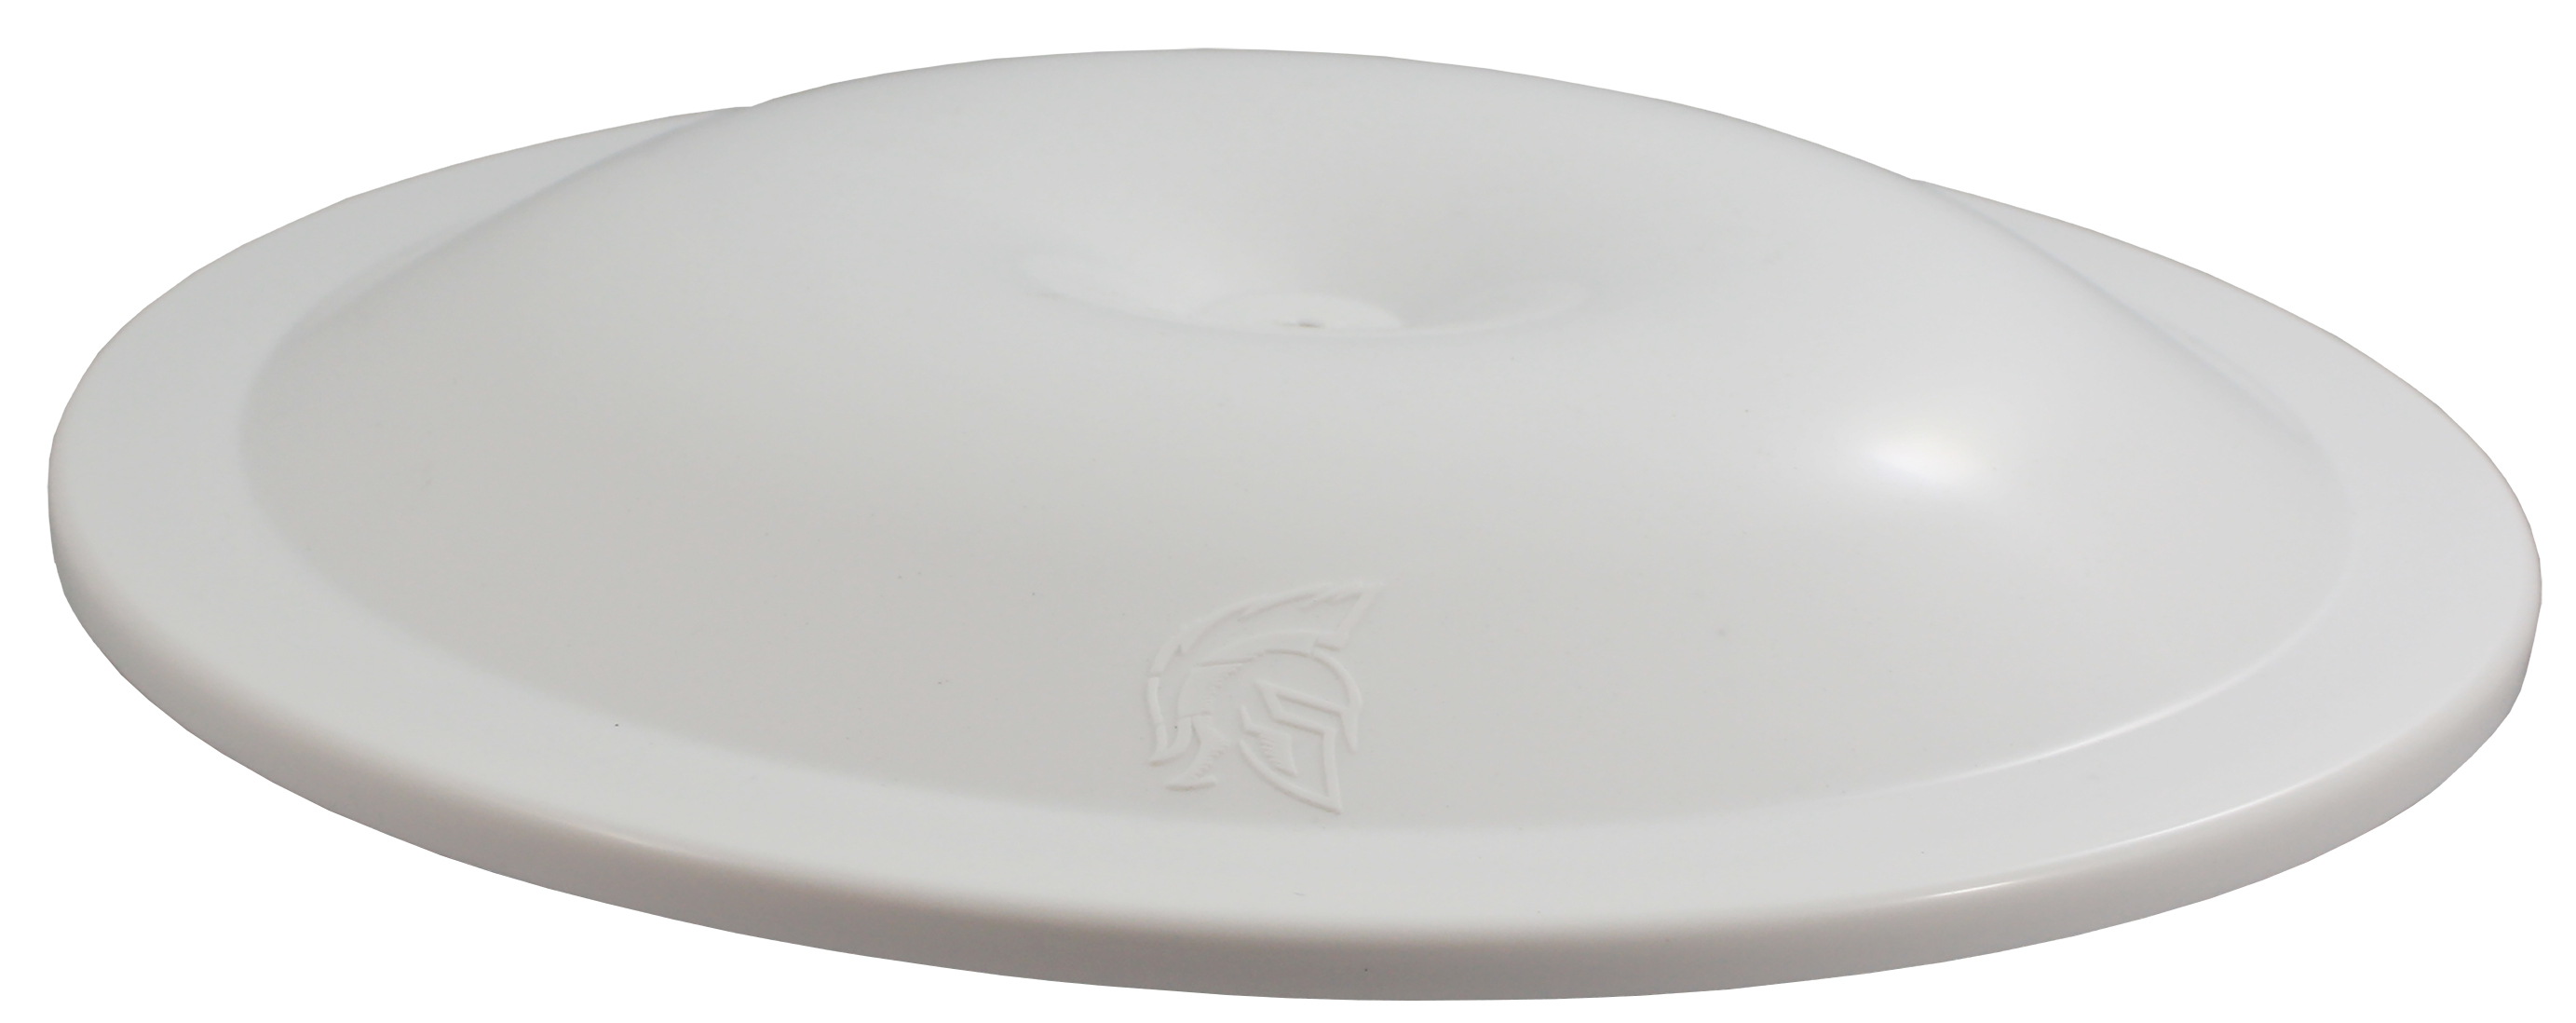 Dirt Defender 5012 Air Cleaner Lid, 14 in Round, Plastic, White, Each